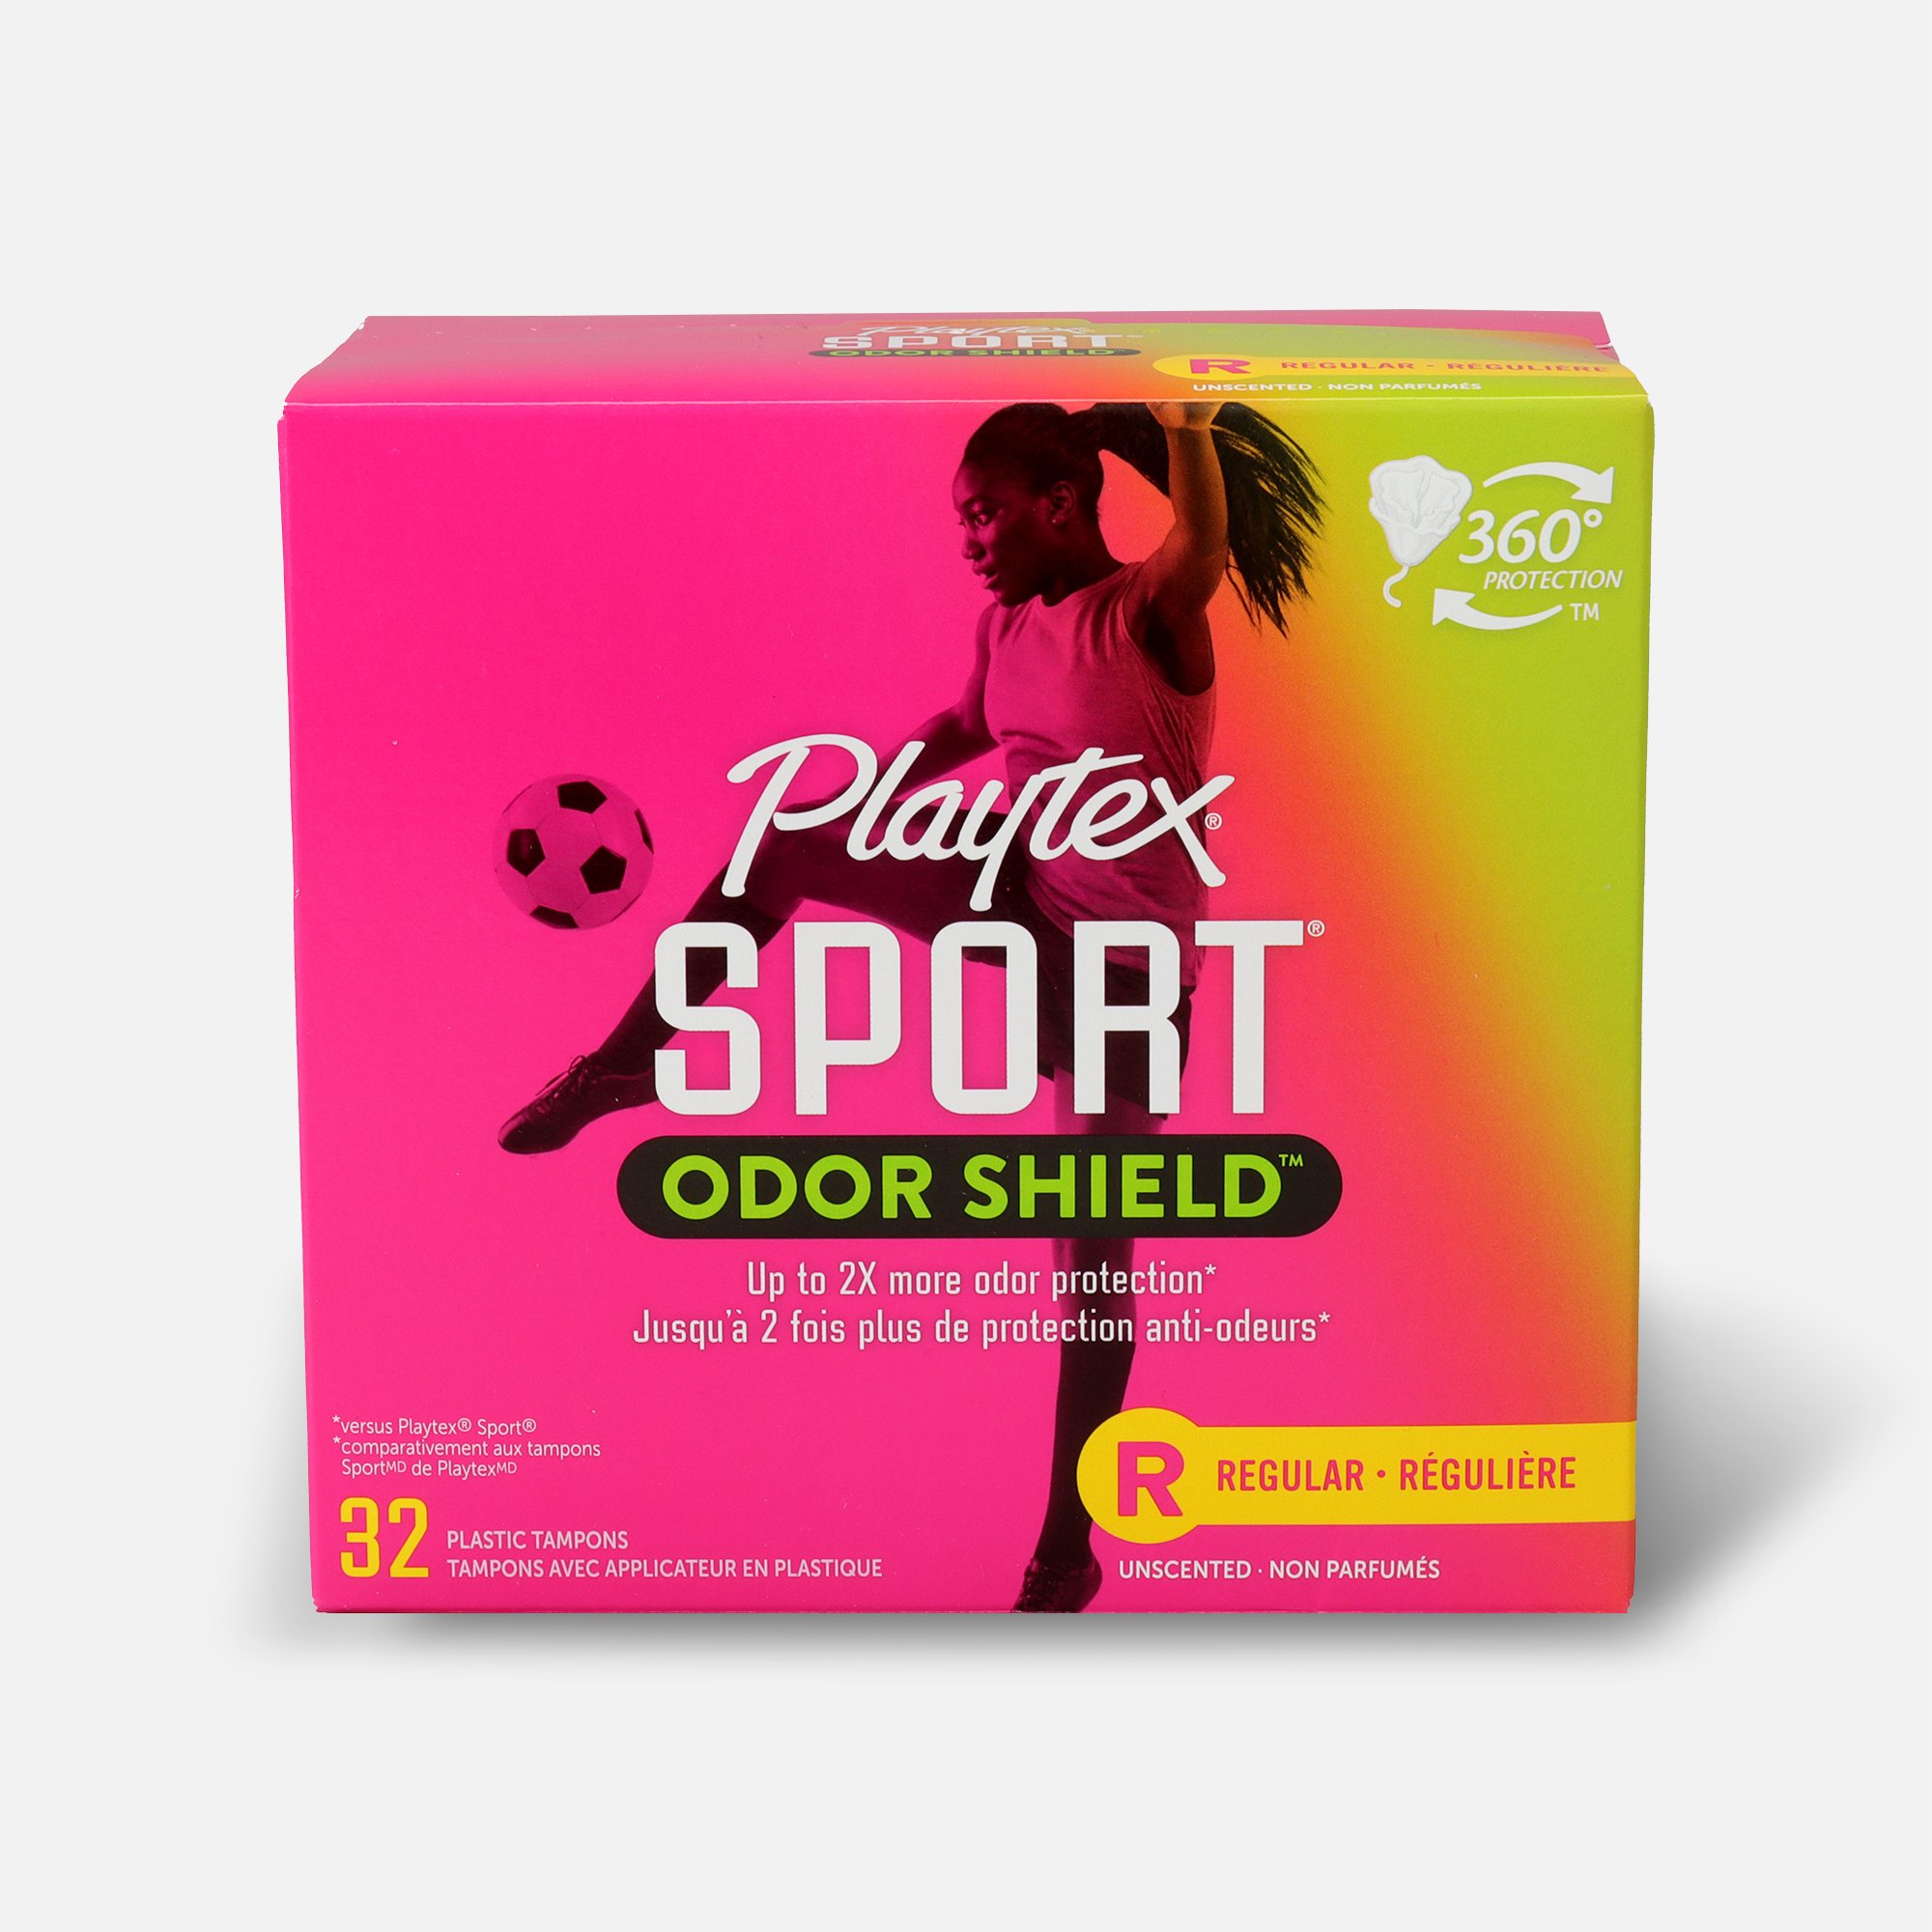 HSA Eligible  Playtex Sport Regular Tampons, Unscented, 36 ct.